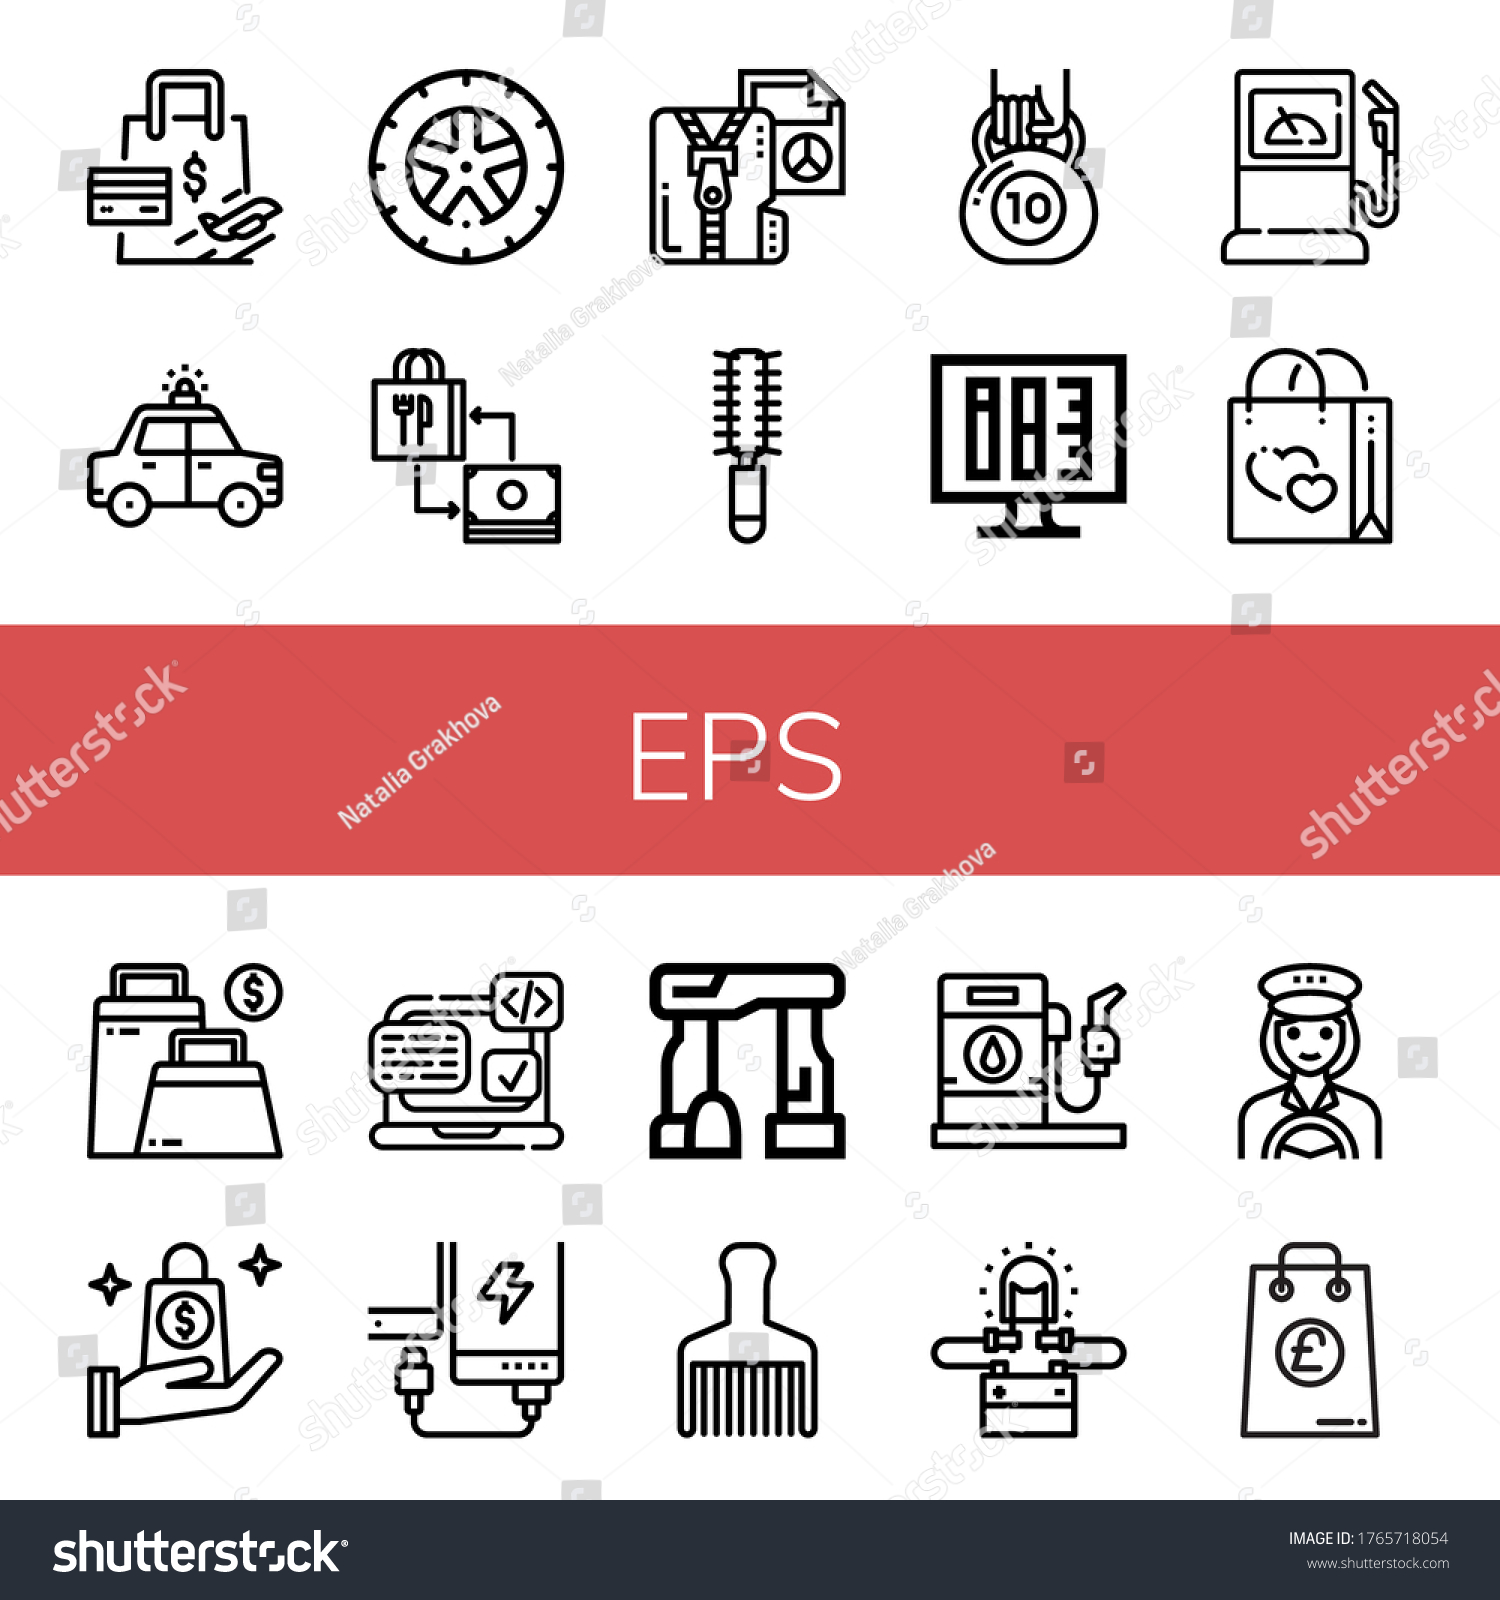 SVG of Set of eps icons. Such as Shopping bag, Police car, Wheel, Compressed file, Hair brush, Kettlebell, Ink level, Fuel station, Bag, Svg, Power bank, Dolmen, Gas station , eps icons svg